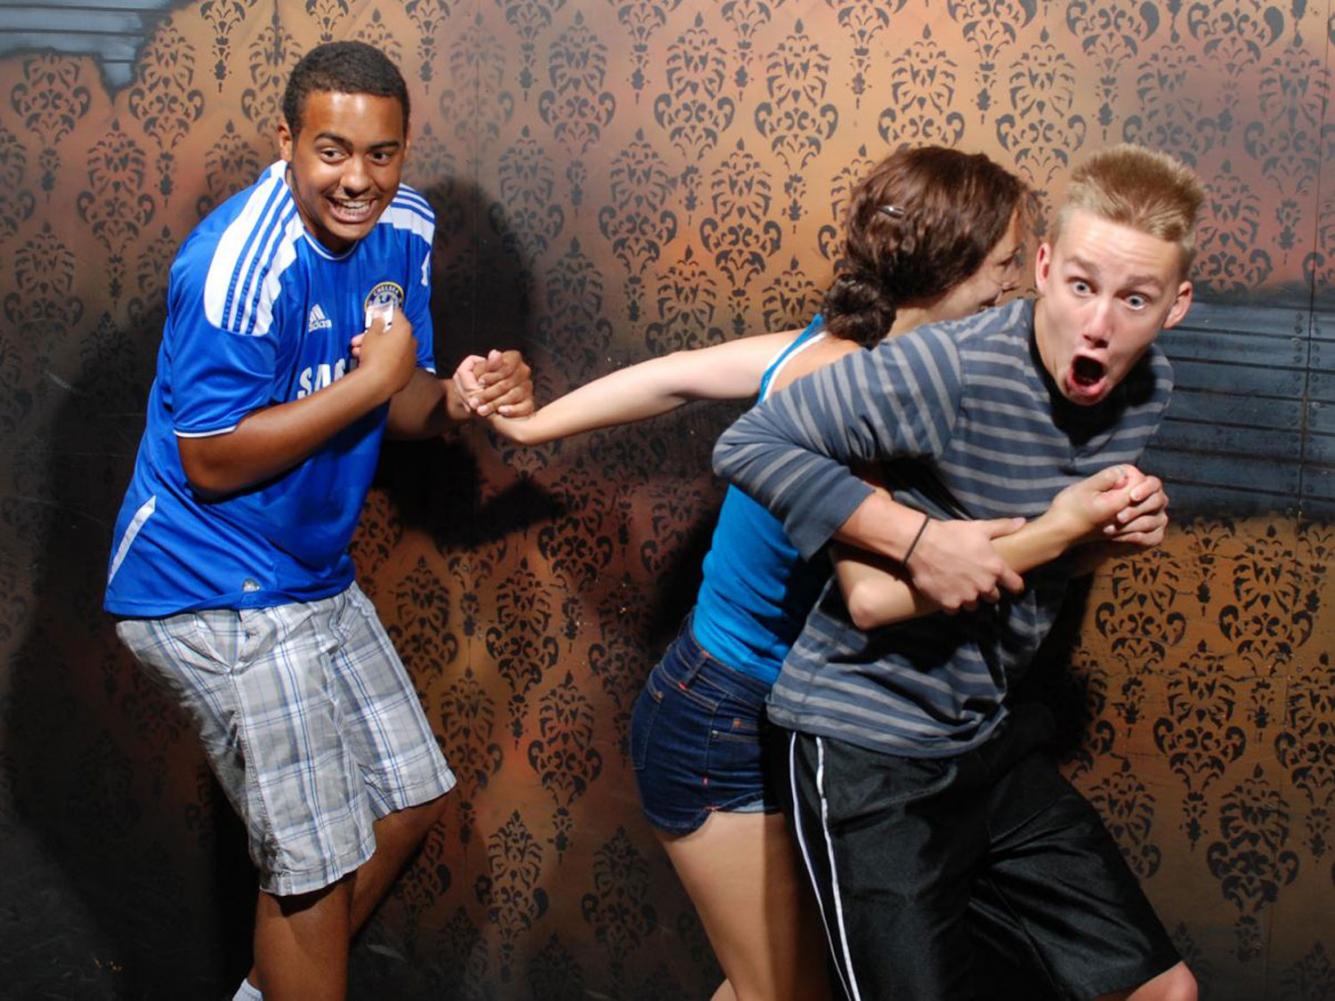 Nightmares Fear Factory Top 40 September 2013 pic0592